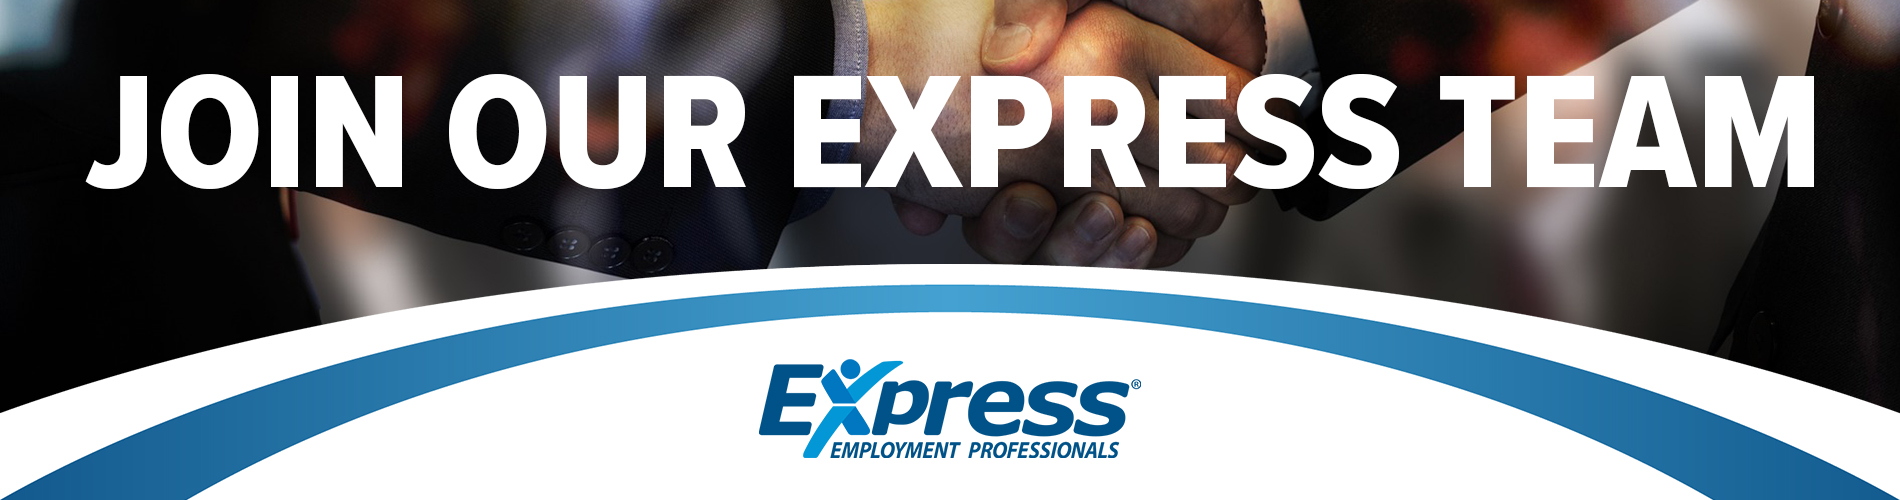 Join Our Express Team, Staffing Industry Jobs in PHX SE